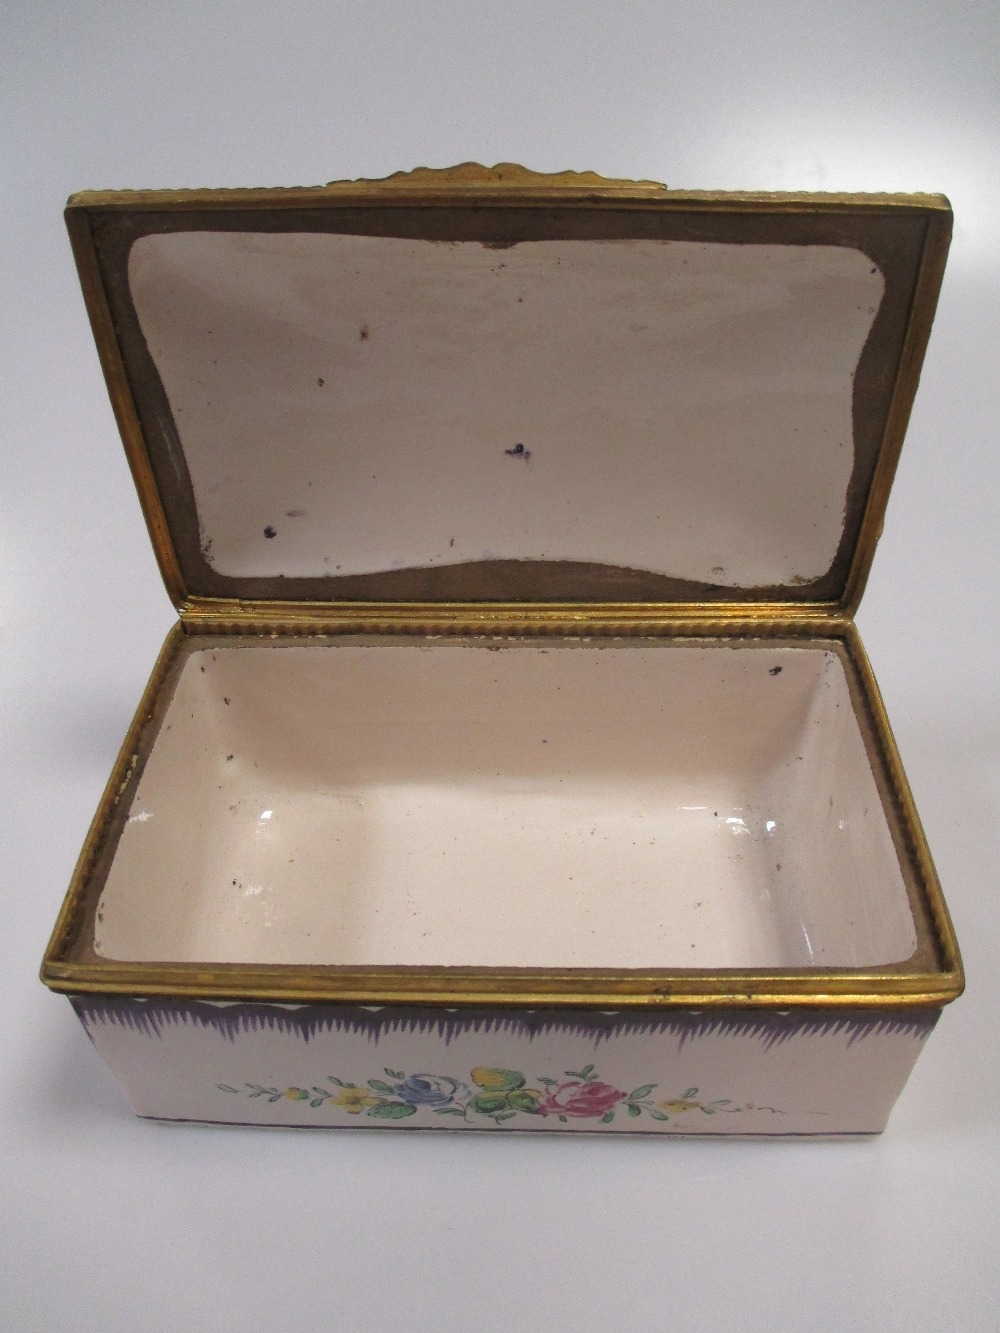 A French 19th century table casket with gilt metal mounts, marked on the underside 'Sceaux' with - Image 4 of 4